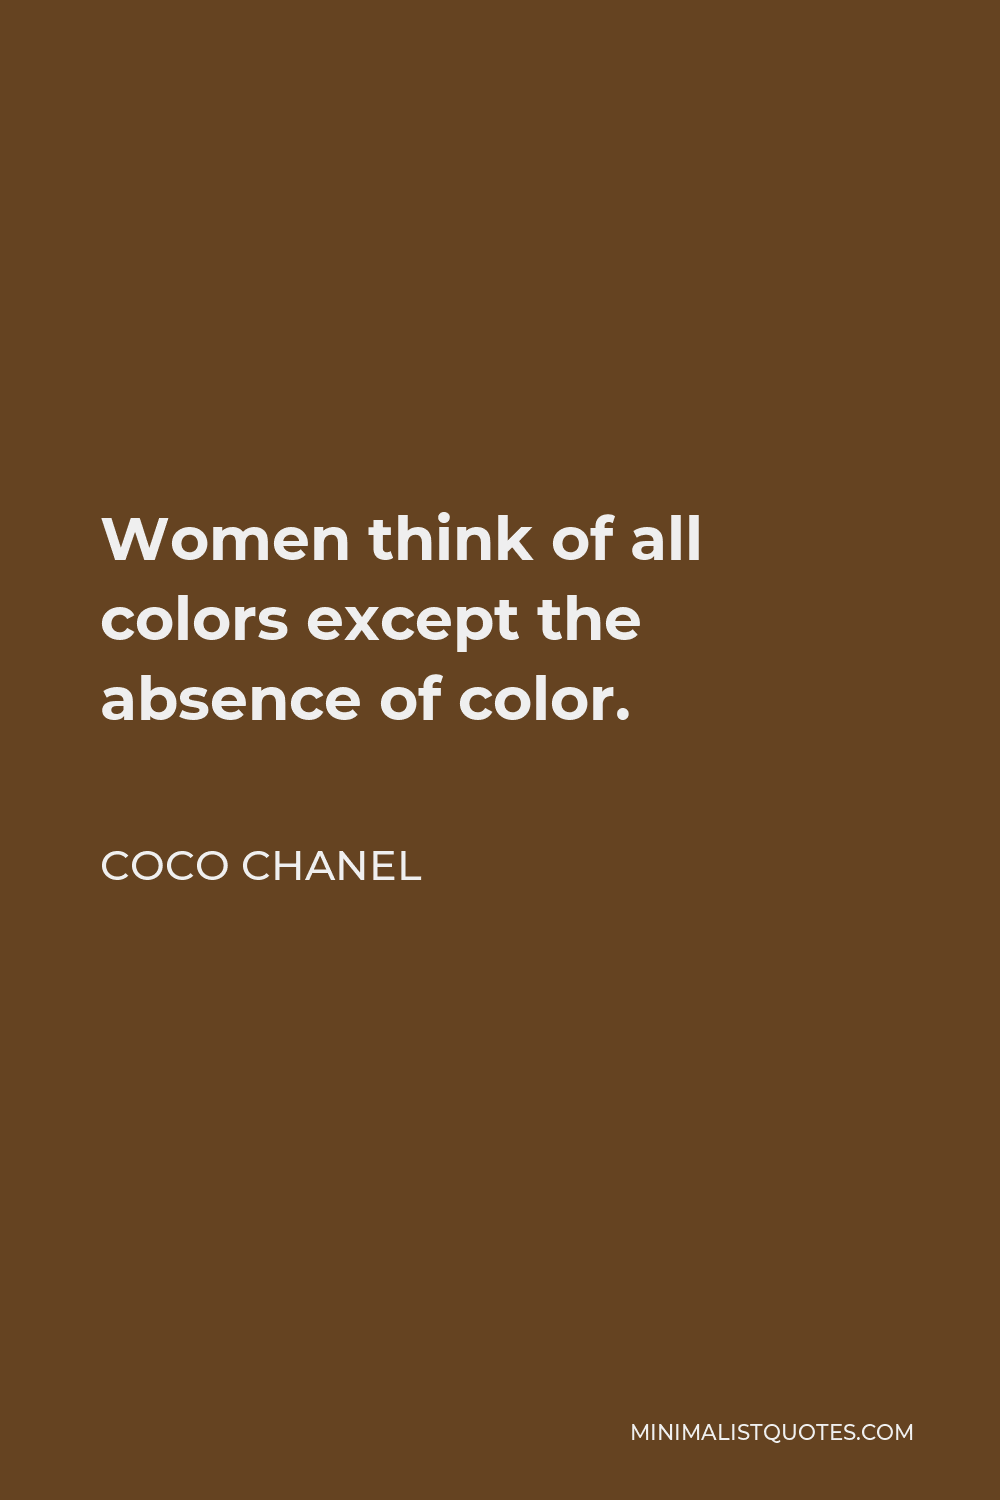 Coco Chanel Quote - Women think of all colors except the absence of color.